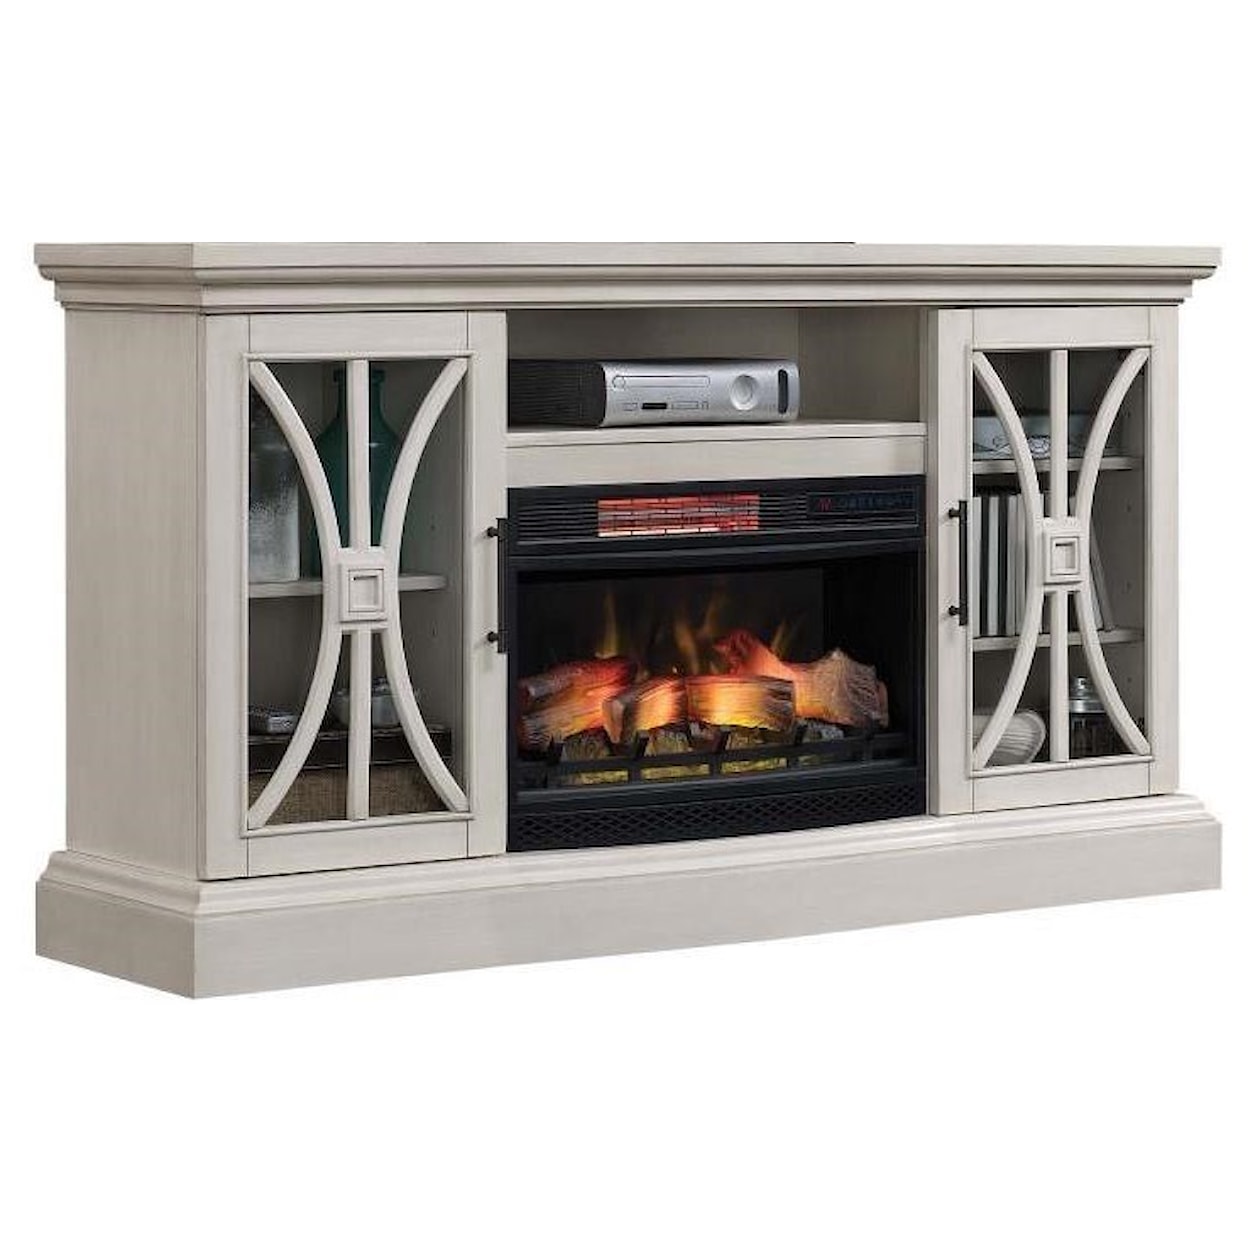 Twin Star Home stephens Stephens Fire Place Console